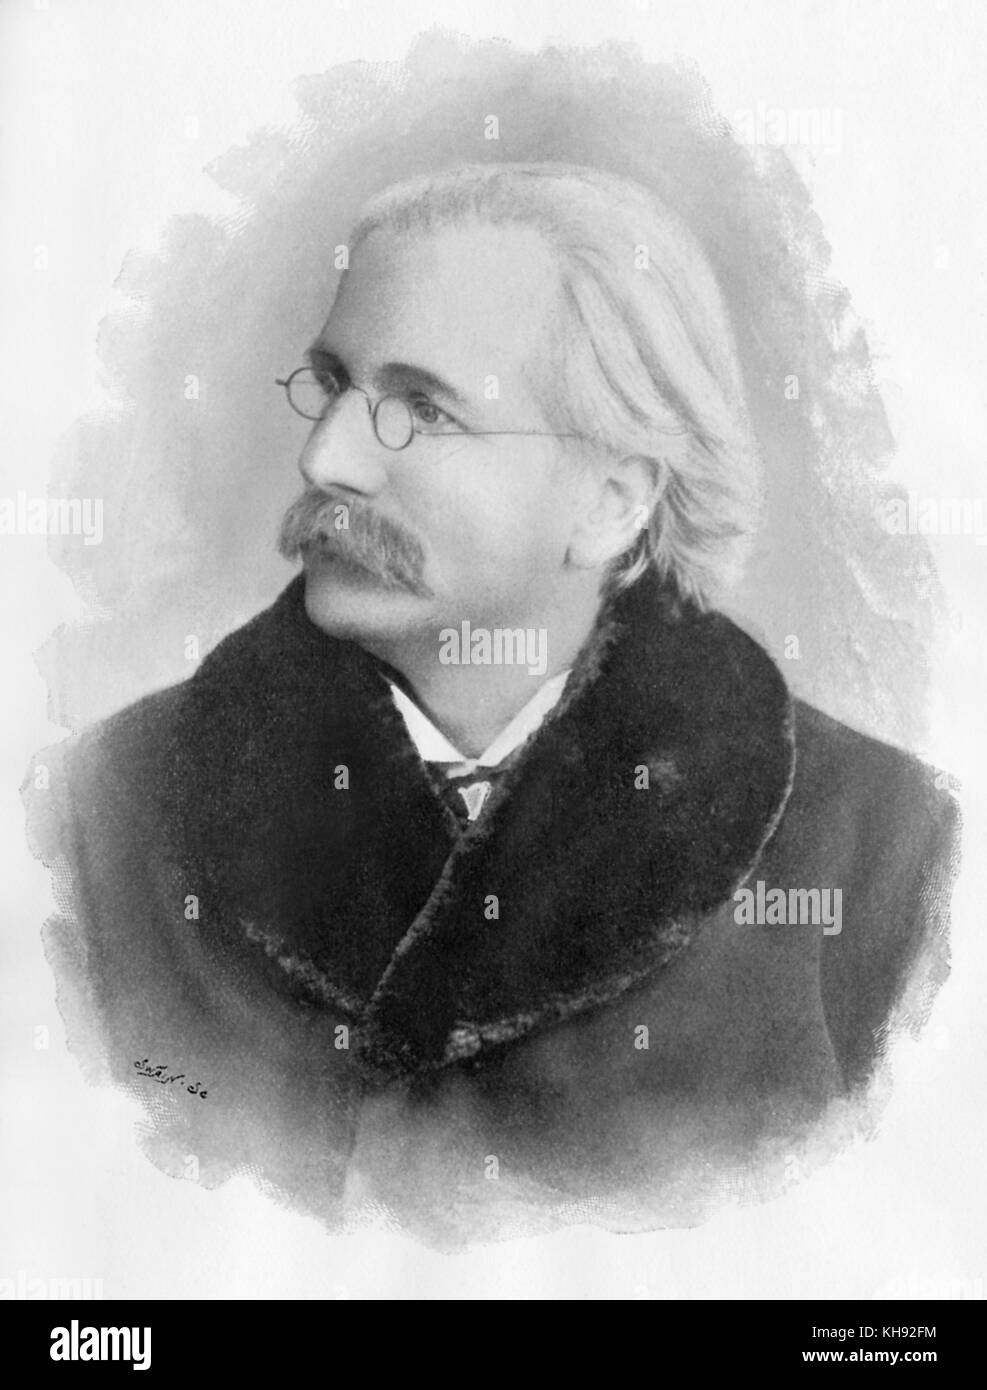 Joseph Parry. Portrait of Welsh composer, musician and lecturer.  21 May 1841 – 17 February 1903. Stock Photo